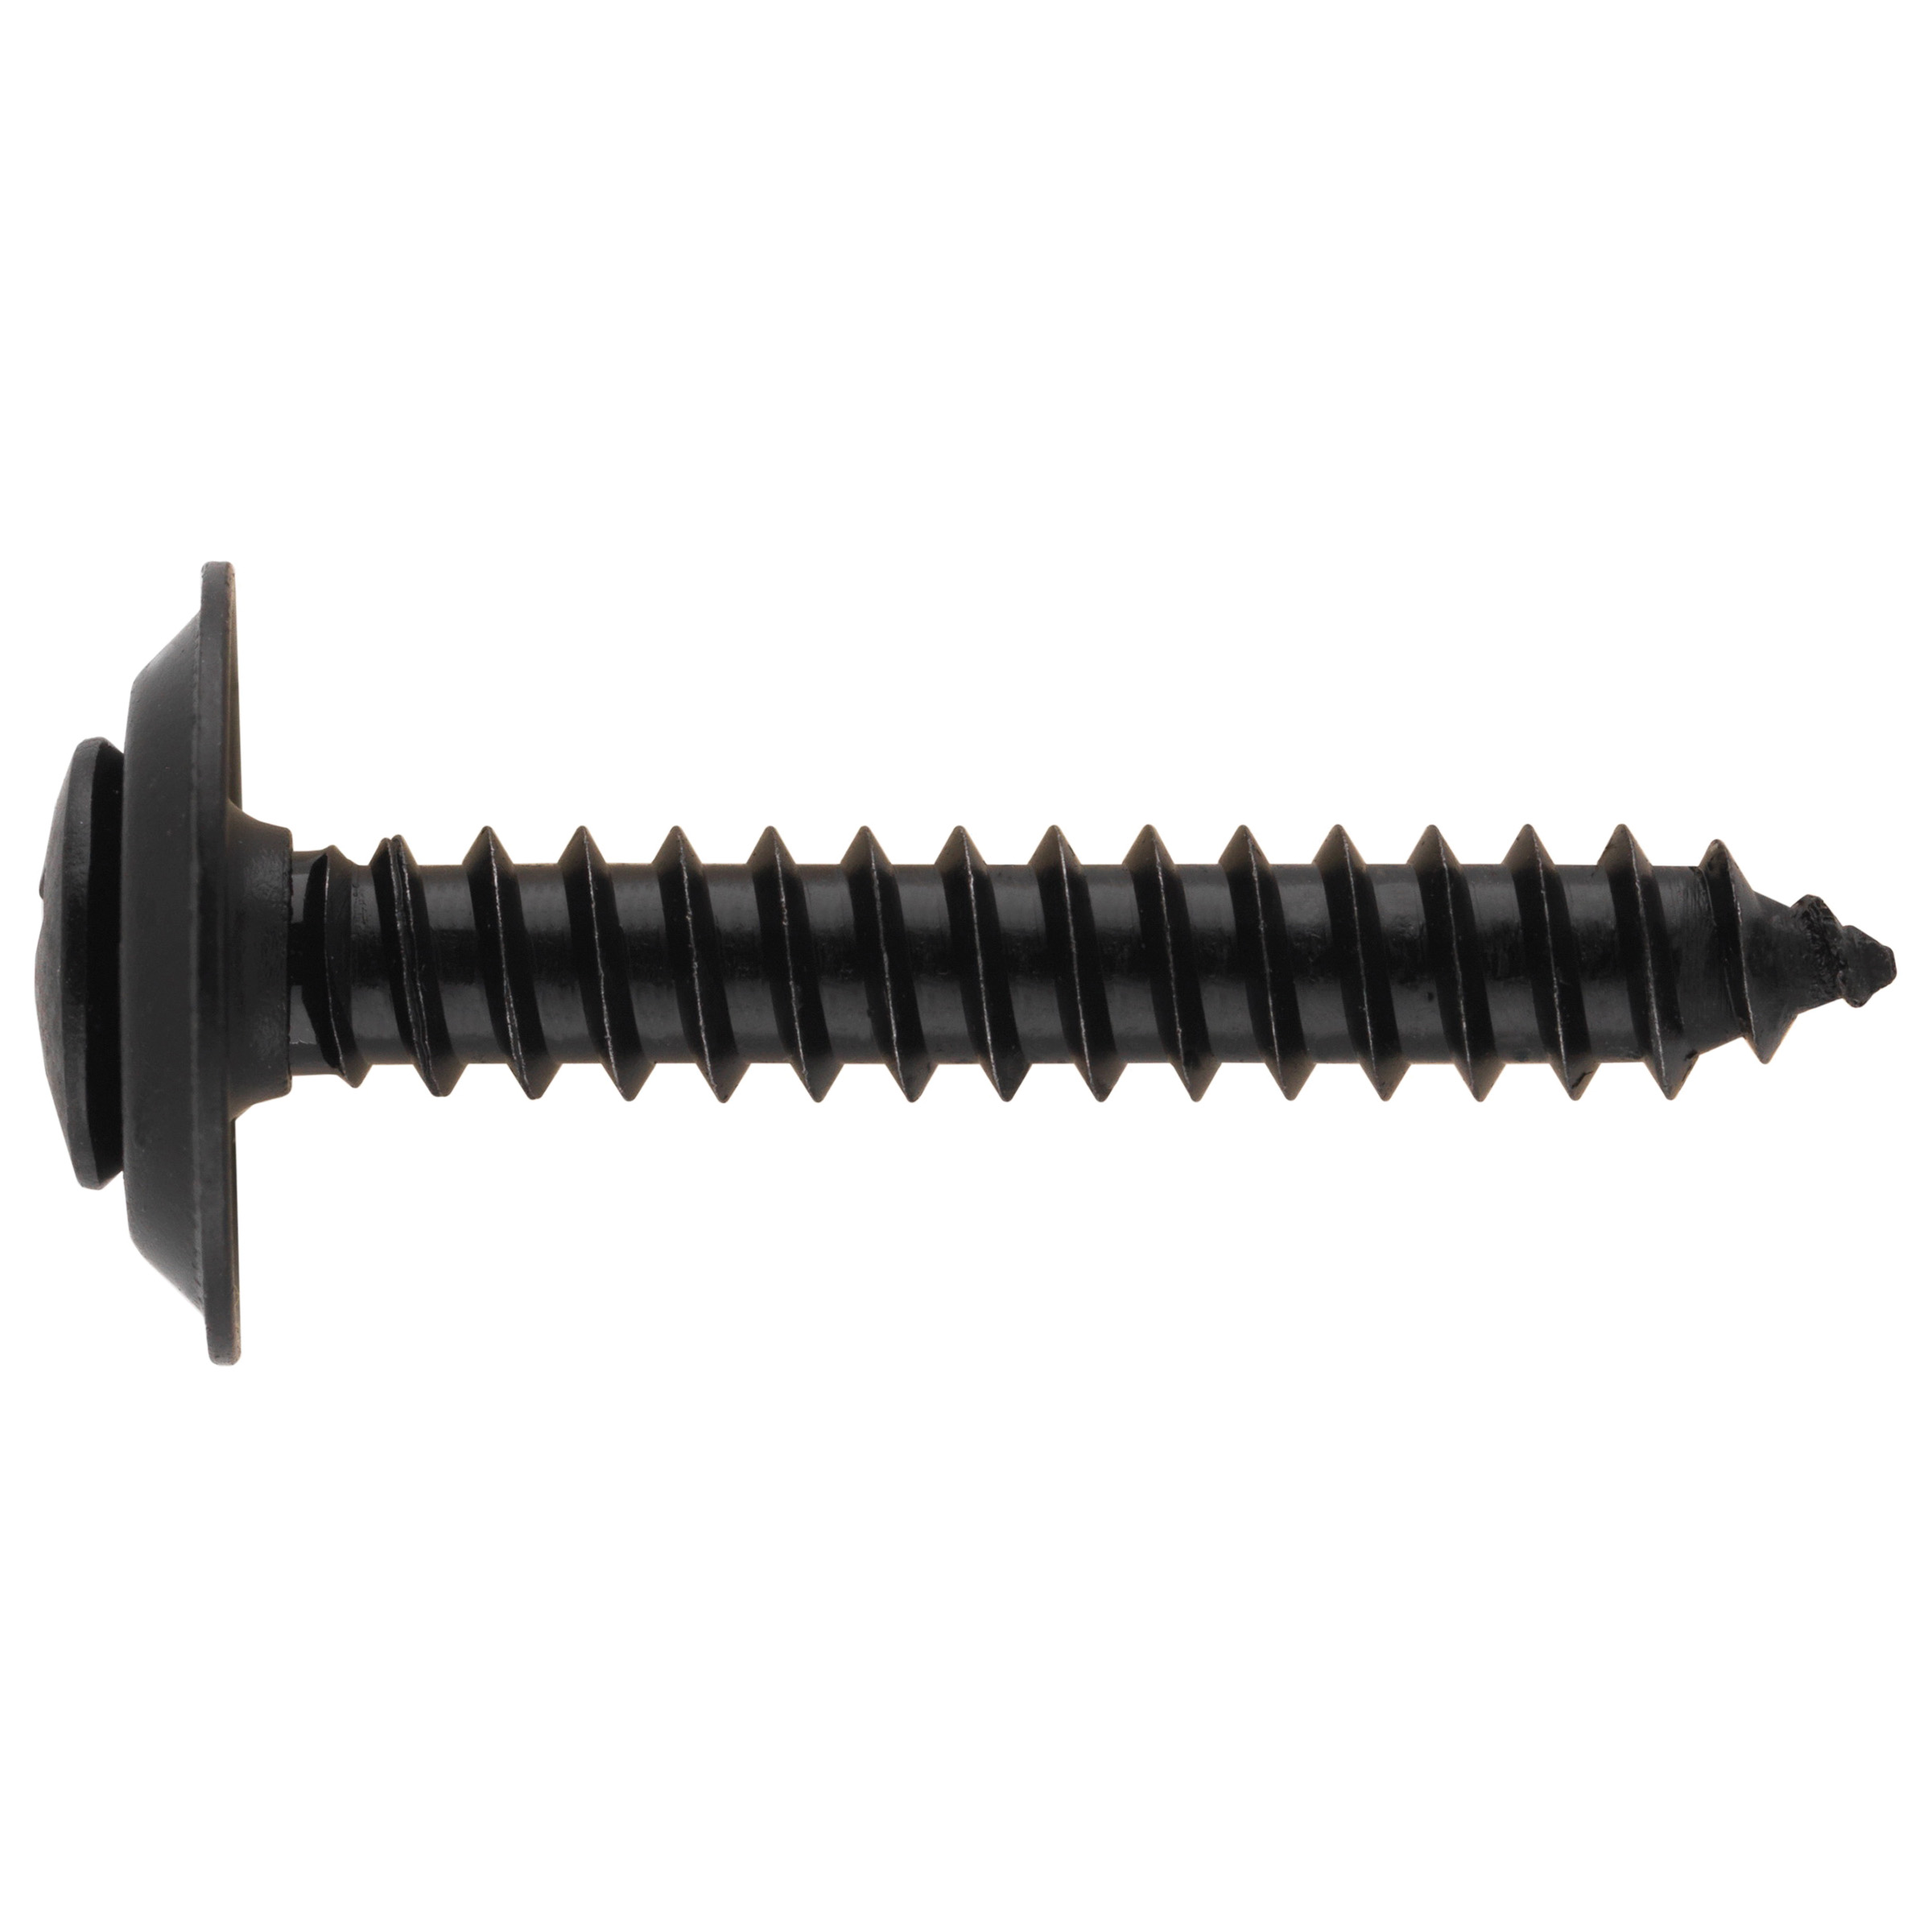 882642 Screw with Washer, #10-16 Thread, 1-1/4 in L, Coarse Thread, Oval, Trim Head, Phillips Drive, Steel